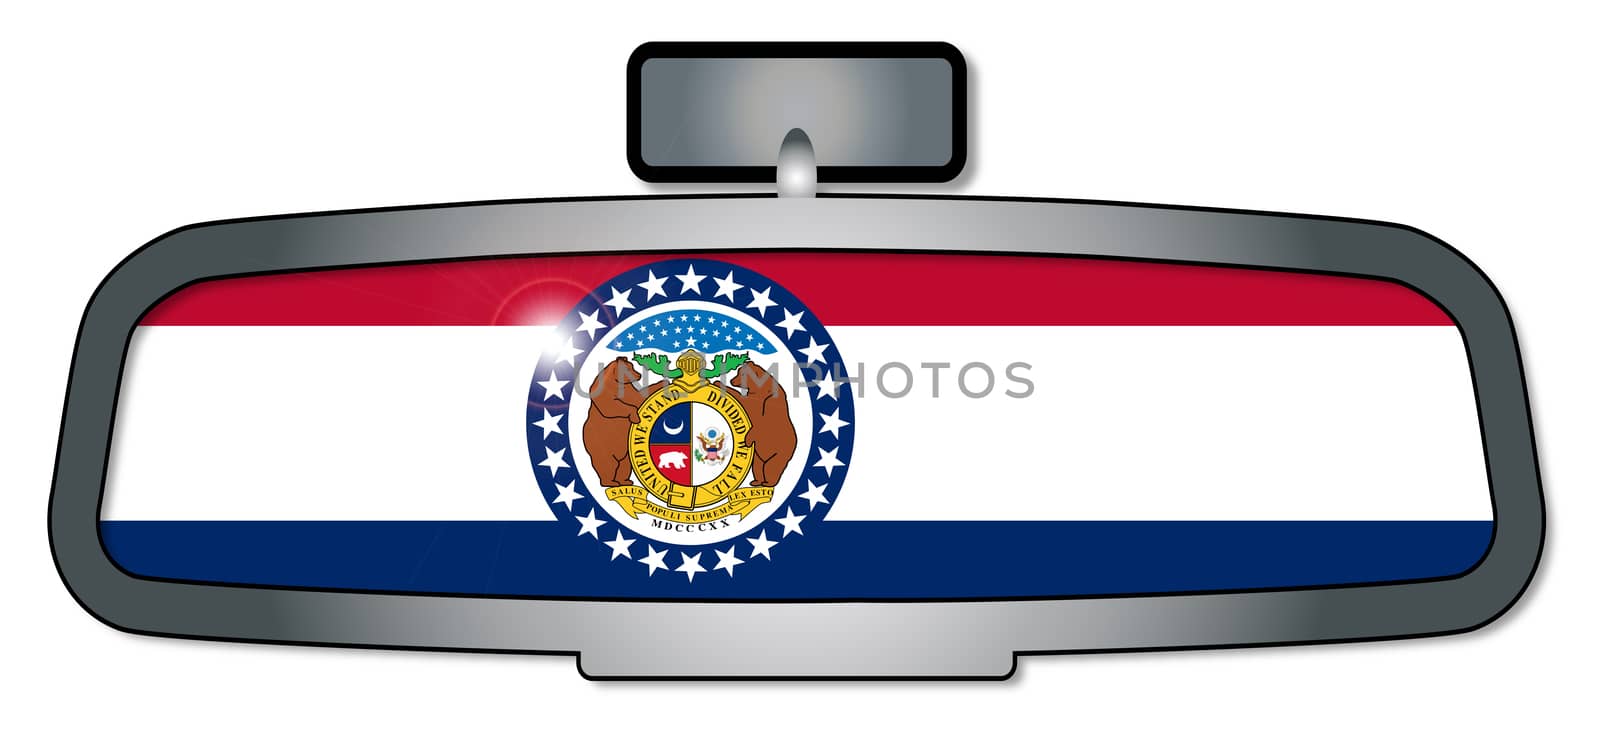 A vehicle rear view mirror with the flag of the state of Missouri